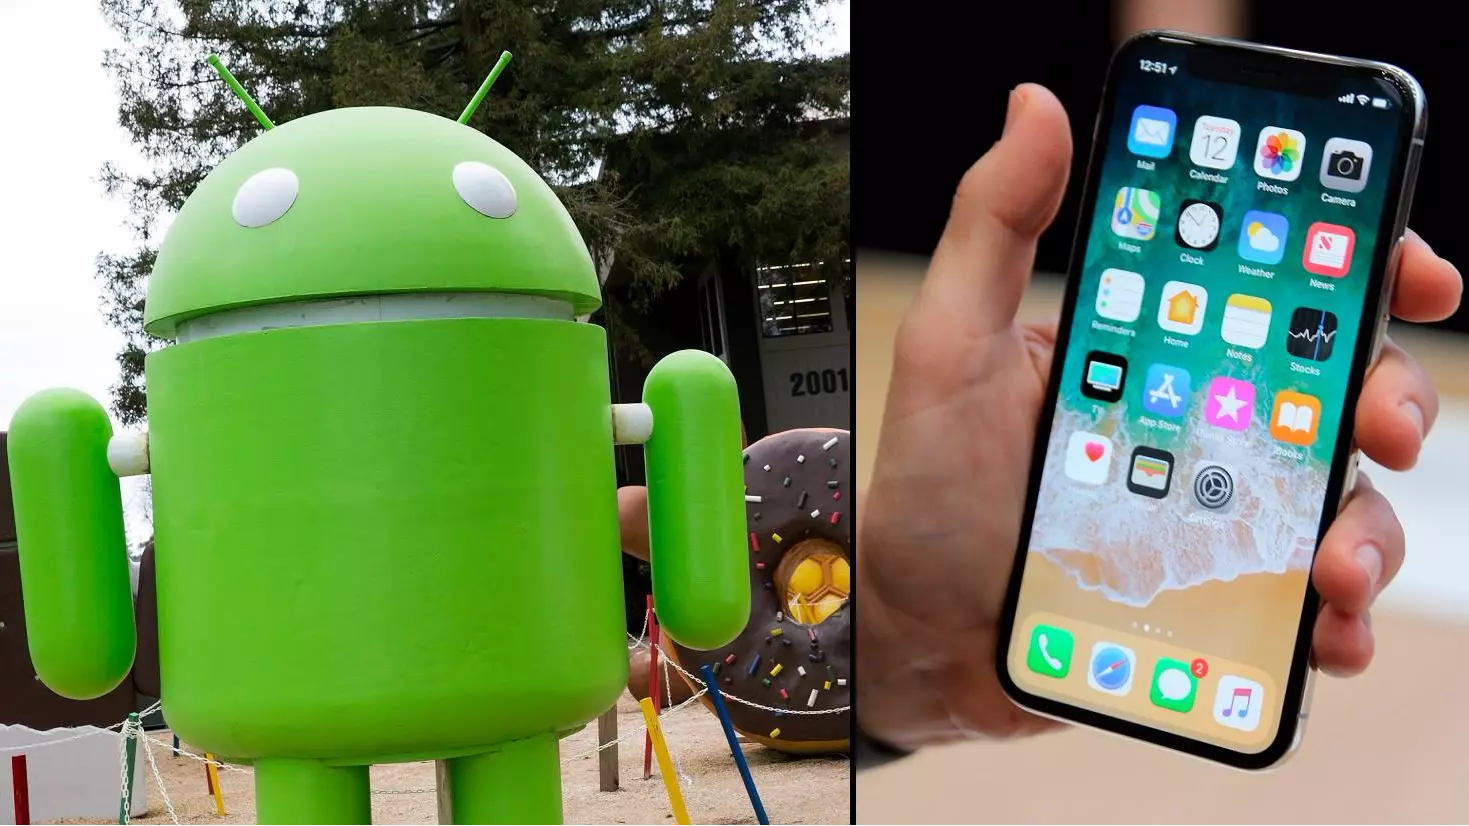 Android Developer Trolls Apple By 'Copying' iPhone X Feature